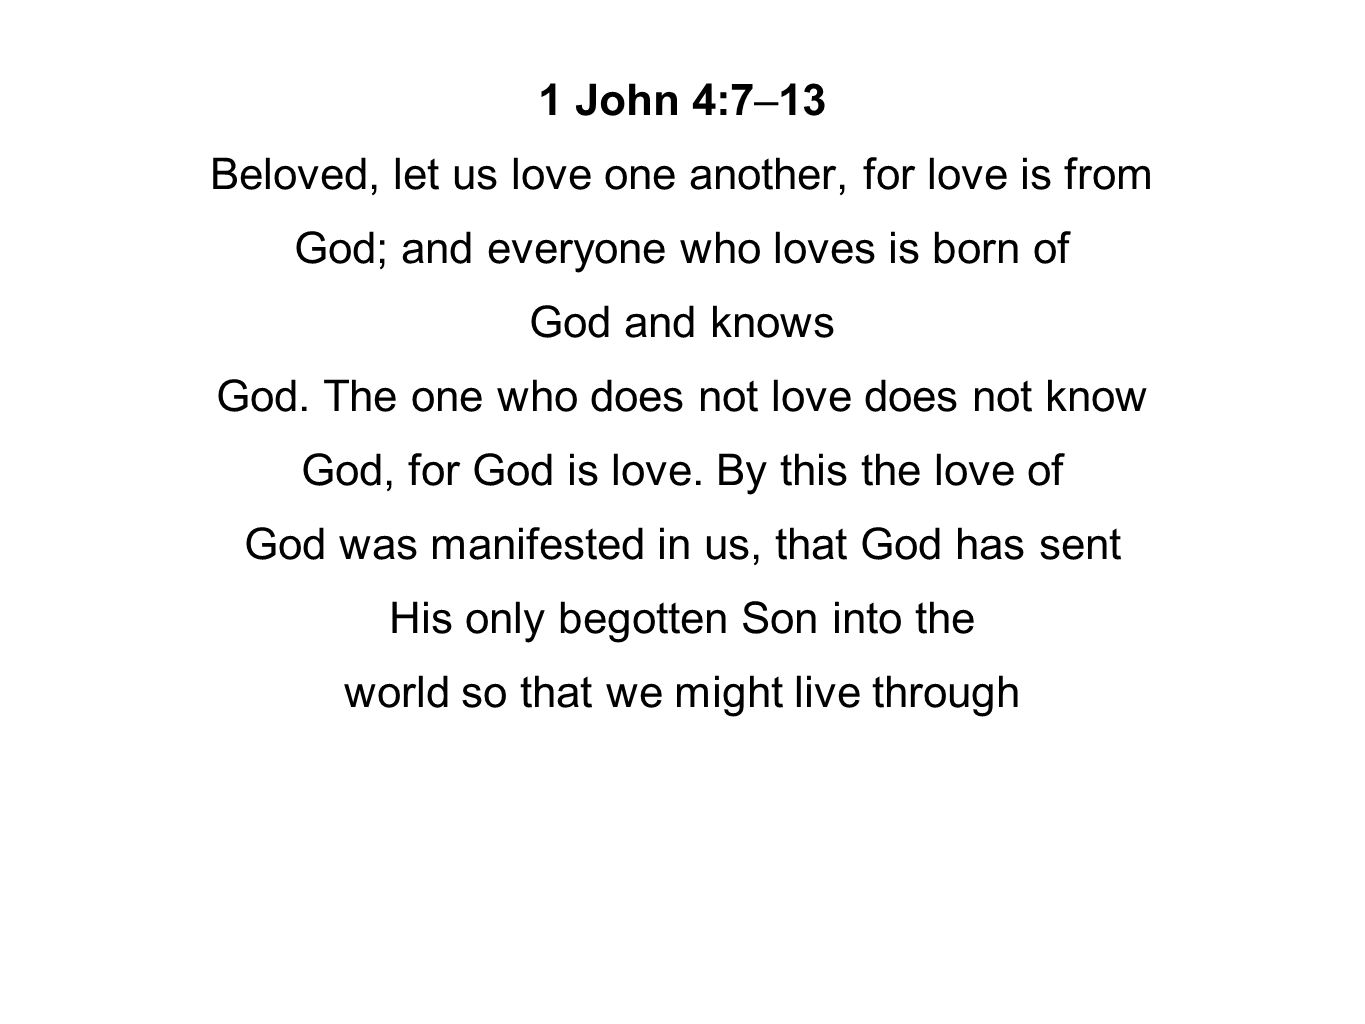 1 John 4:7–13 Beloved, let us love one another, for love is from God; and everyone who loves is born of God and knows God.